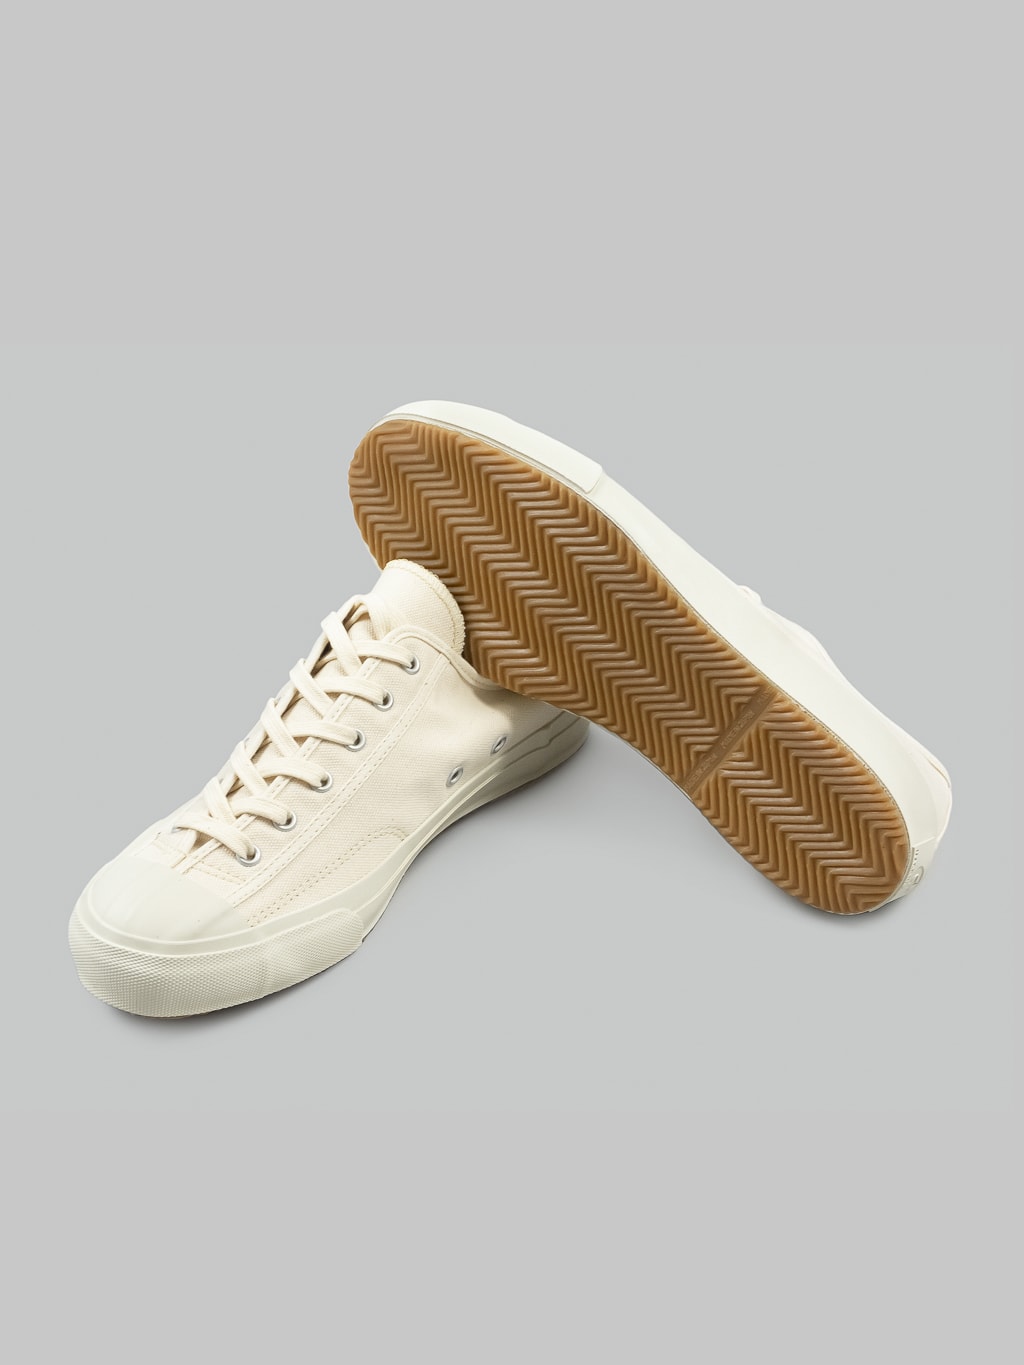 Moonstar Gym Classic White Sneakers vulcanized sole